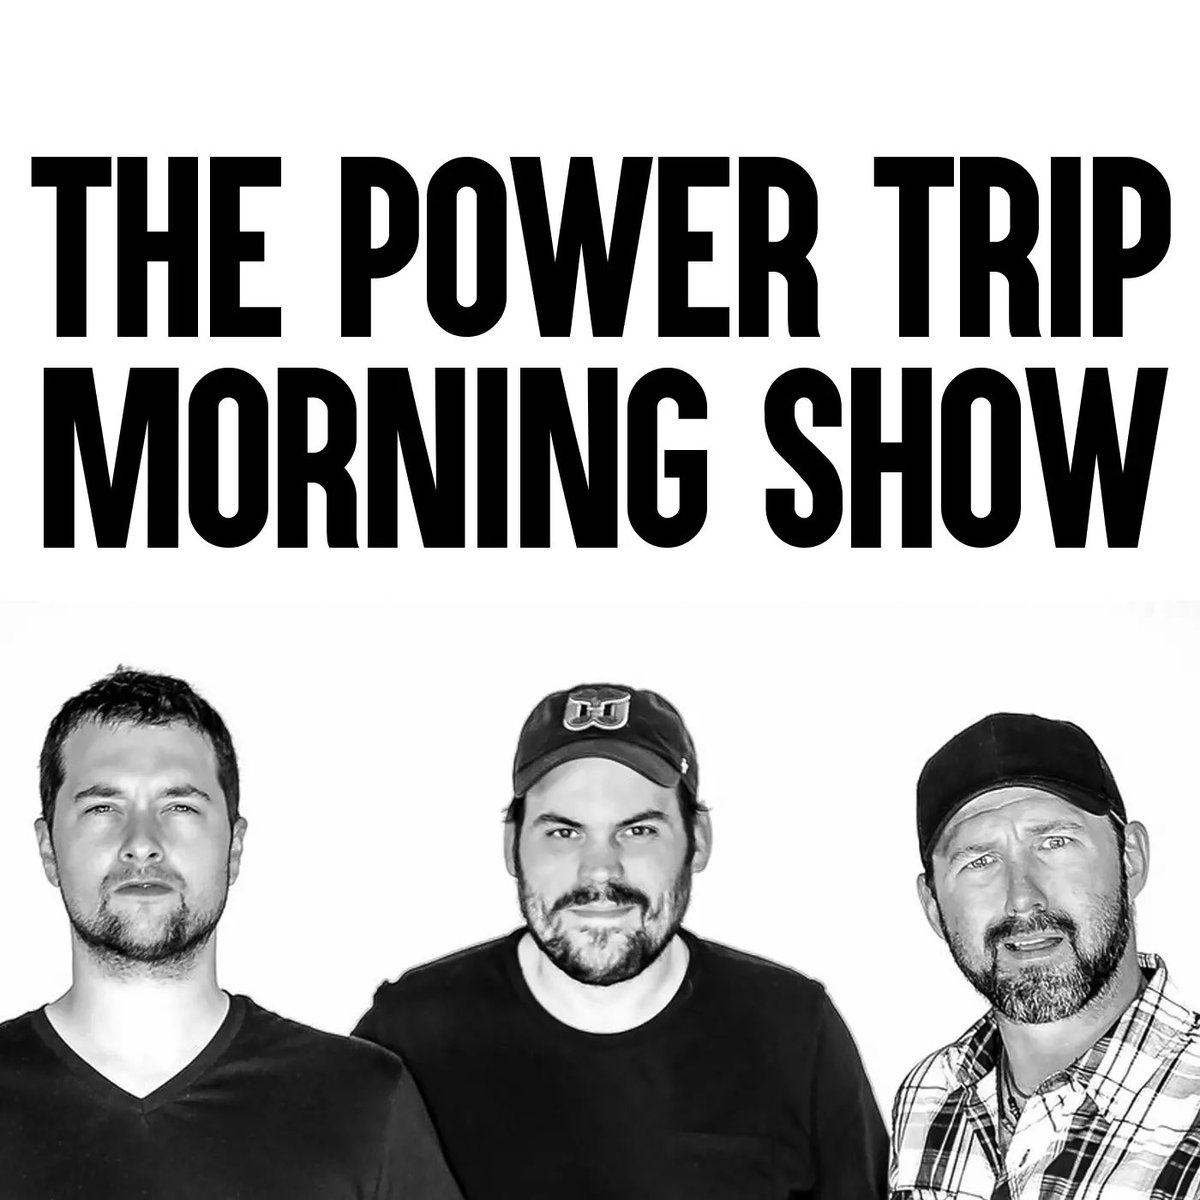 REMINDER: The @PowerTripKFAN is LIVE tomorrow on Memorial Day from 7-9a. We’ll talk @Timberwolves/@dallasmavs Game 3 and complain about working on Memorial Day. LISTEN: KFAN.com/listen